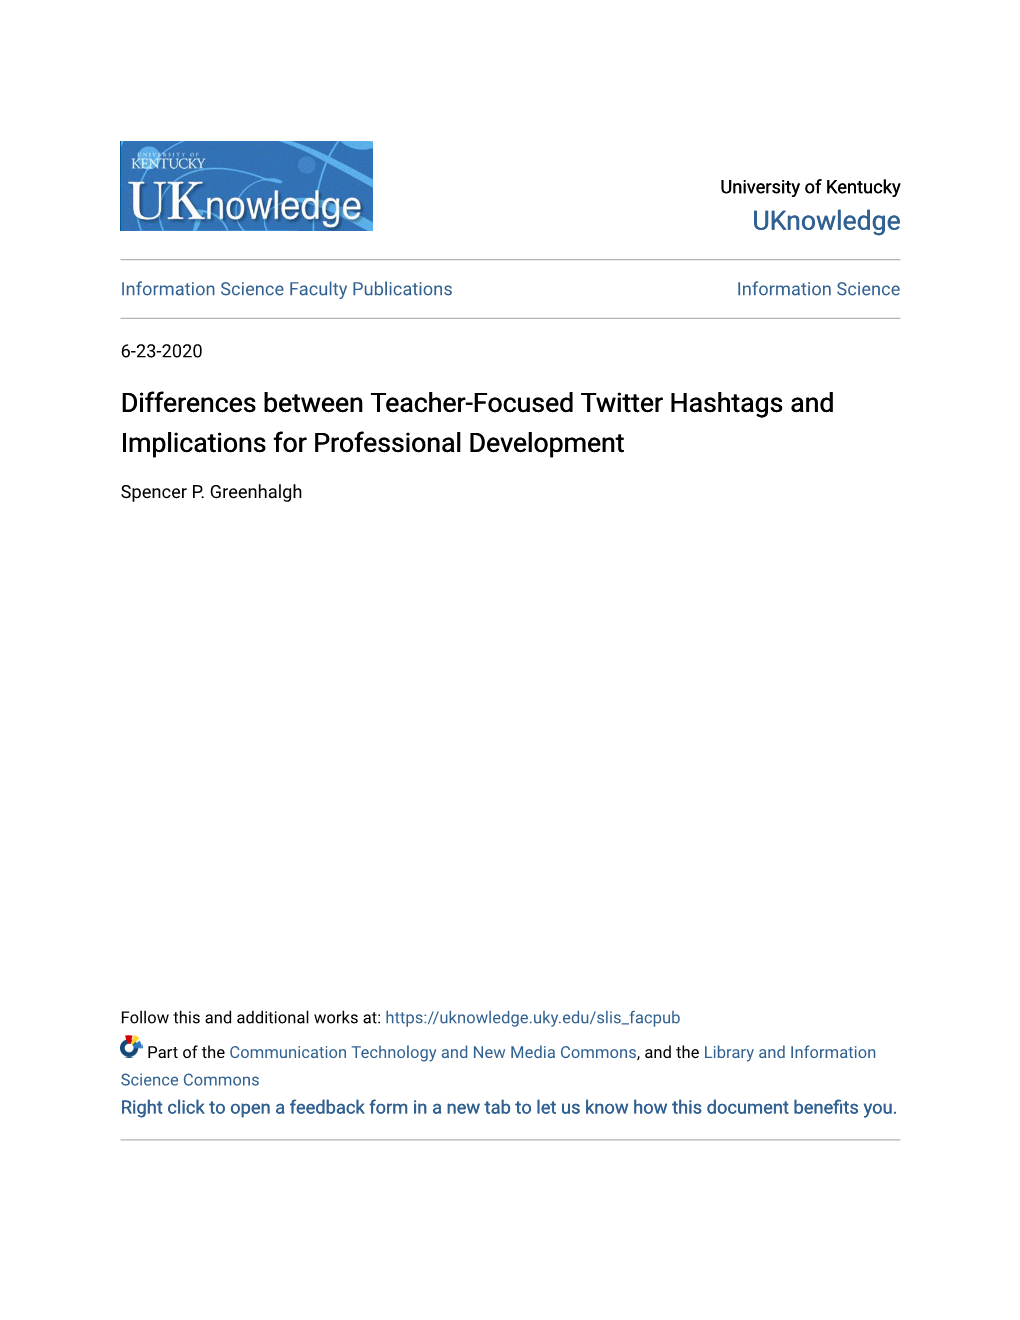 Differences Between Teacher-Focused Twitter Hashtags and Implications for Professional Development